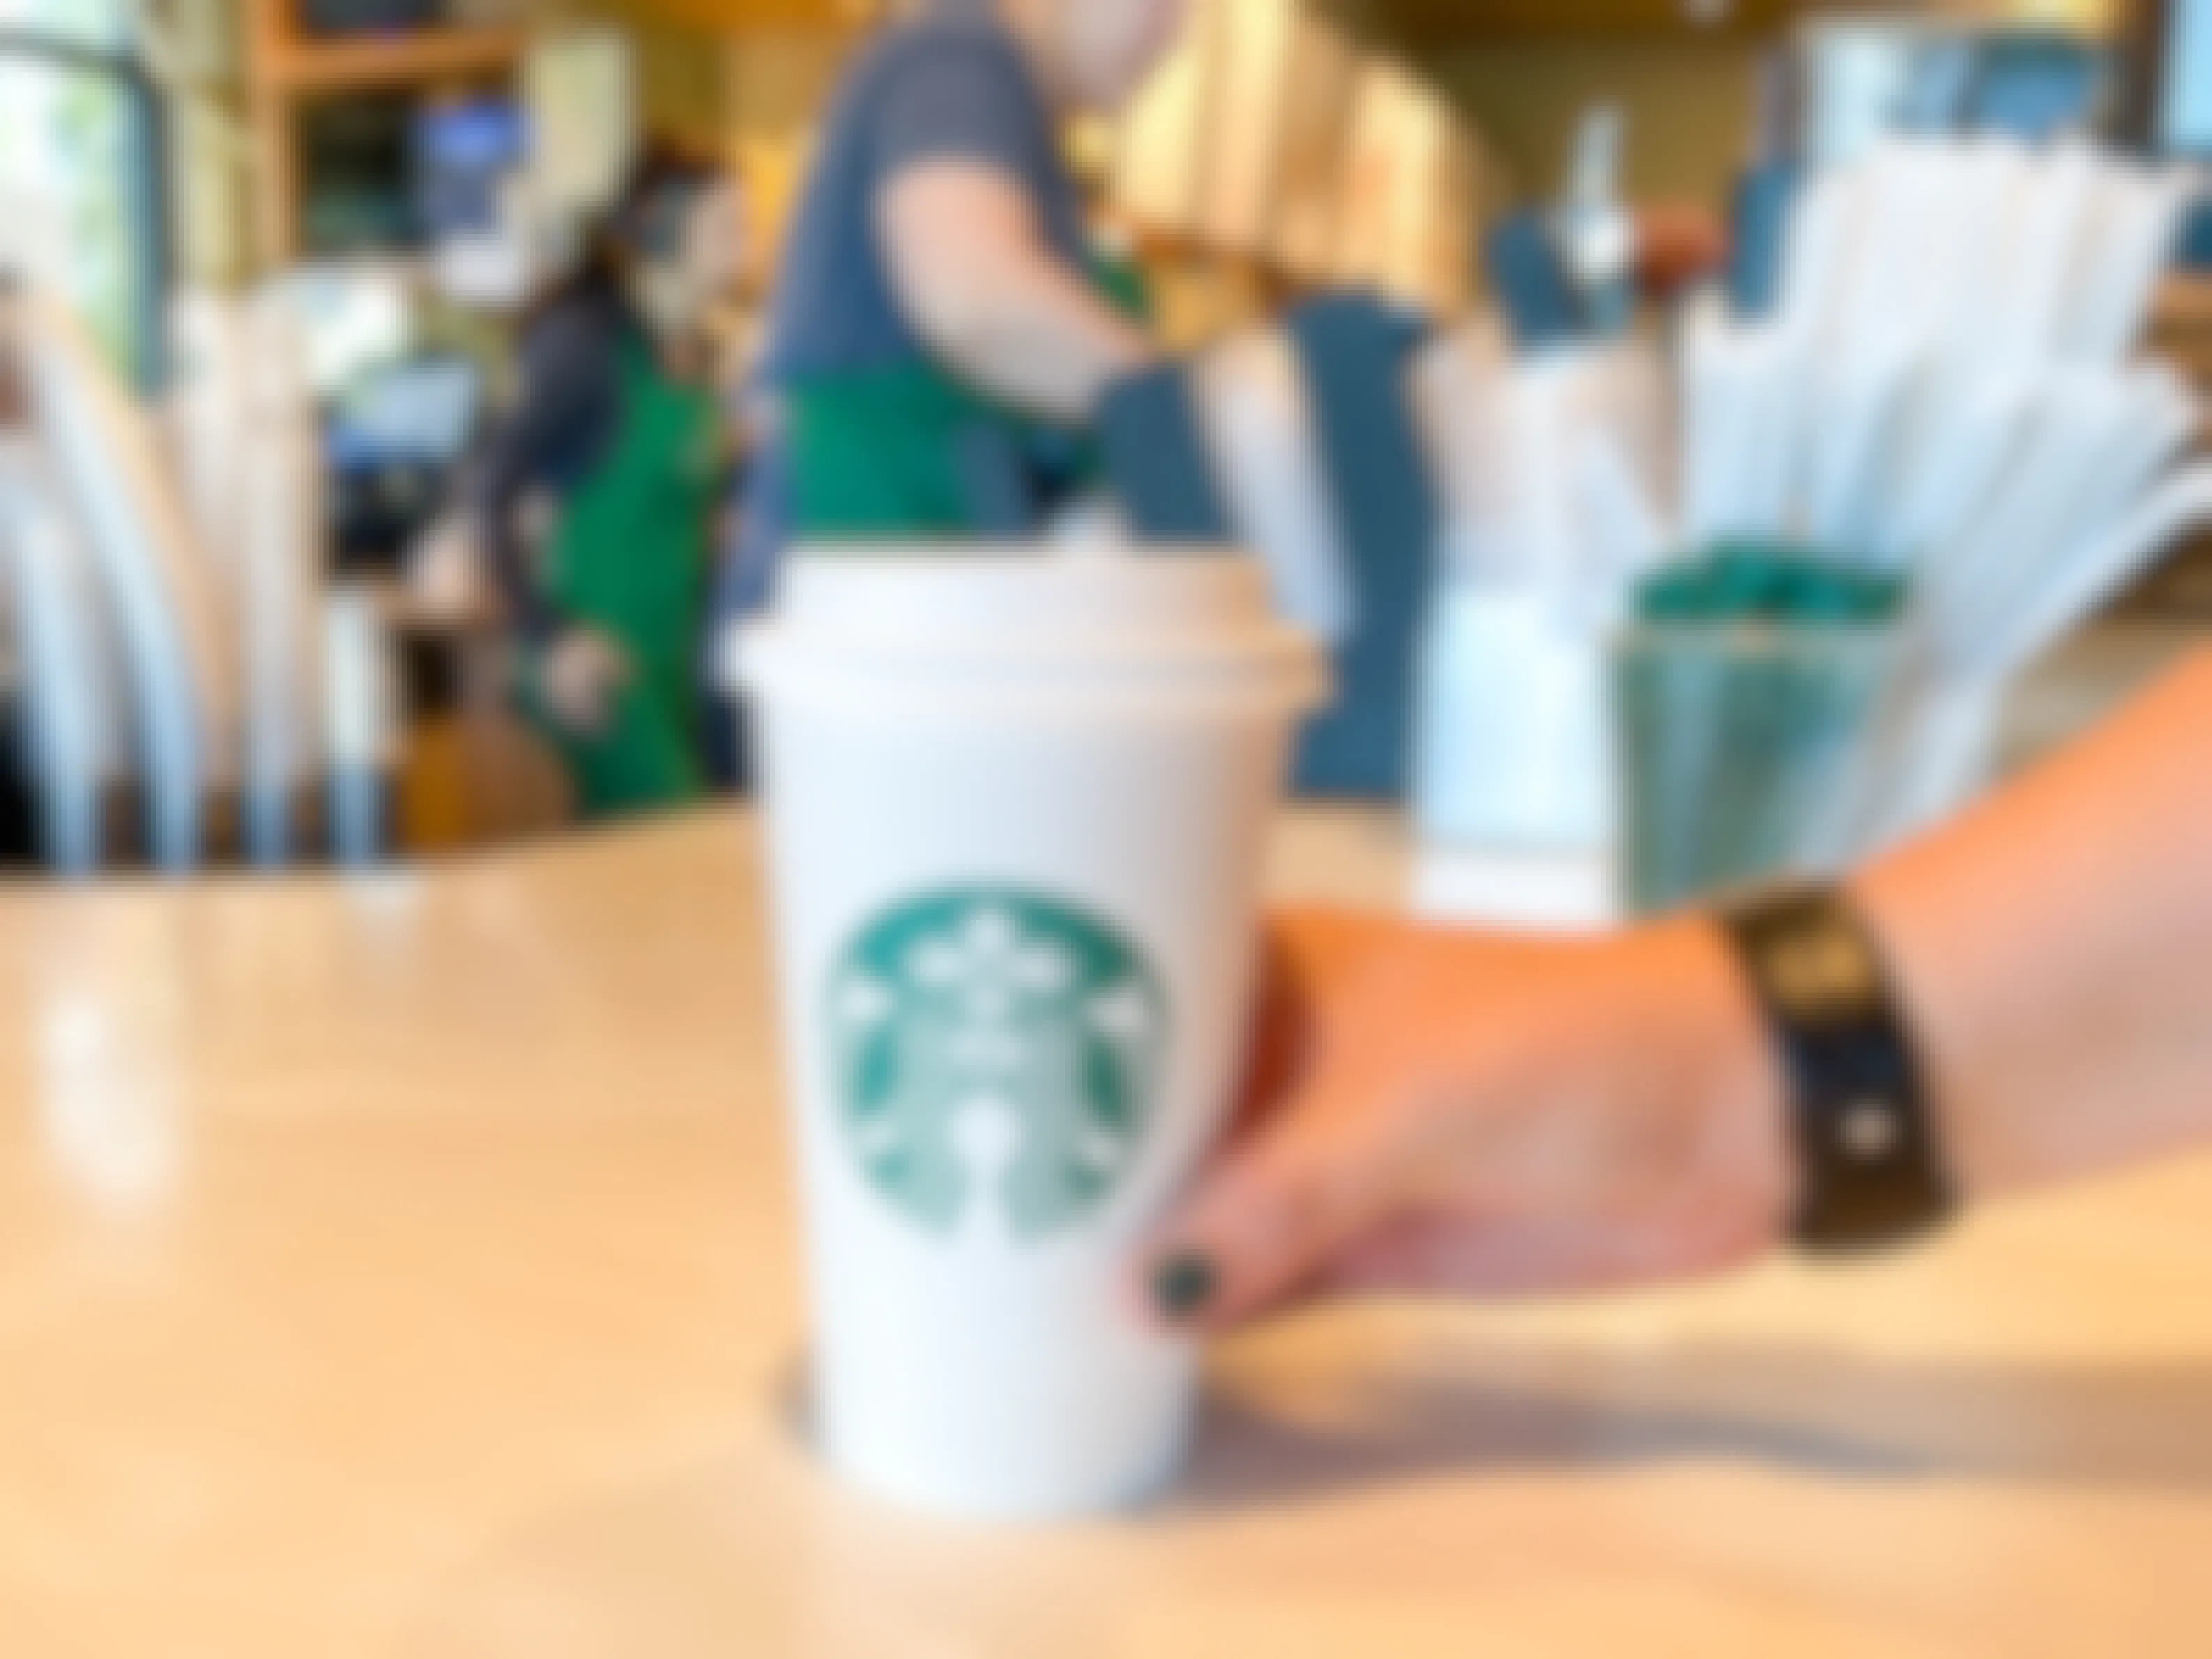 a Starbucks drink being grabbed from the counter at Starbucks